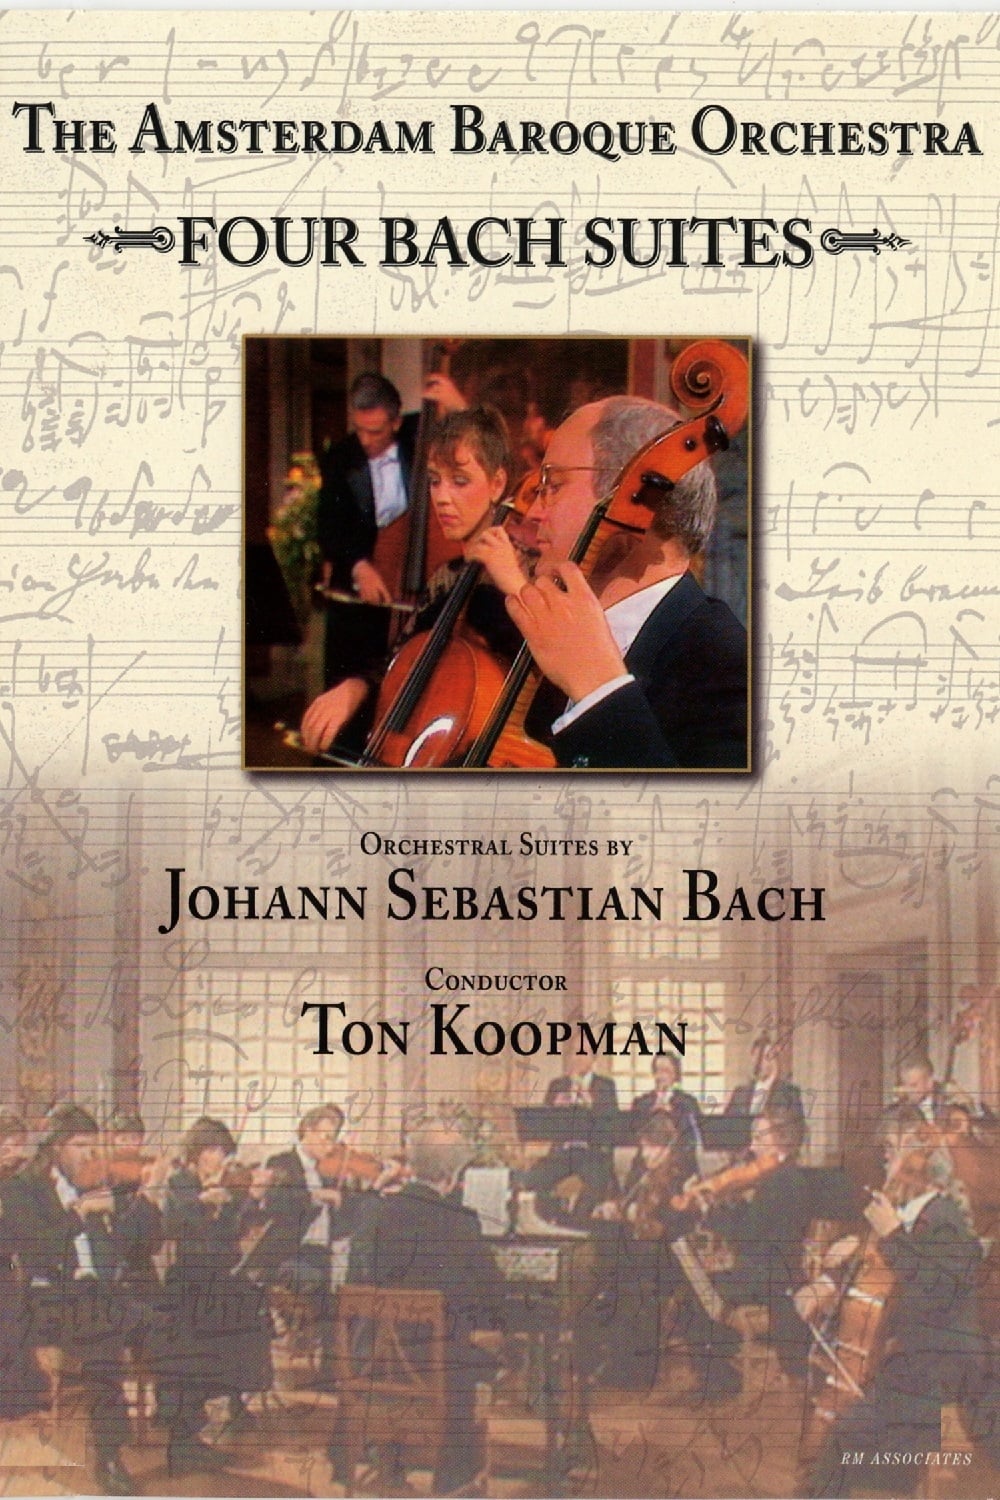 The Amsterdam Baroque Orchestra - Four Bach Suites - Ton Koopman